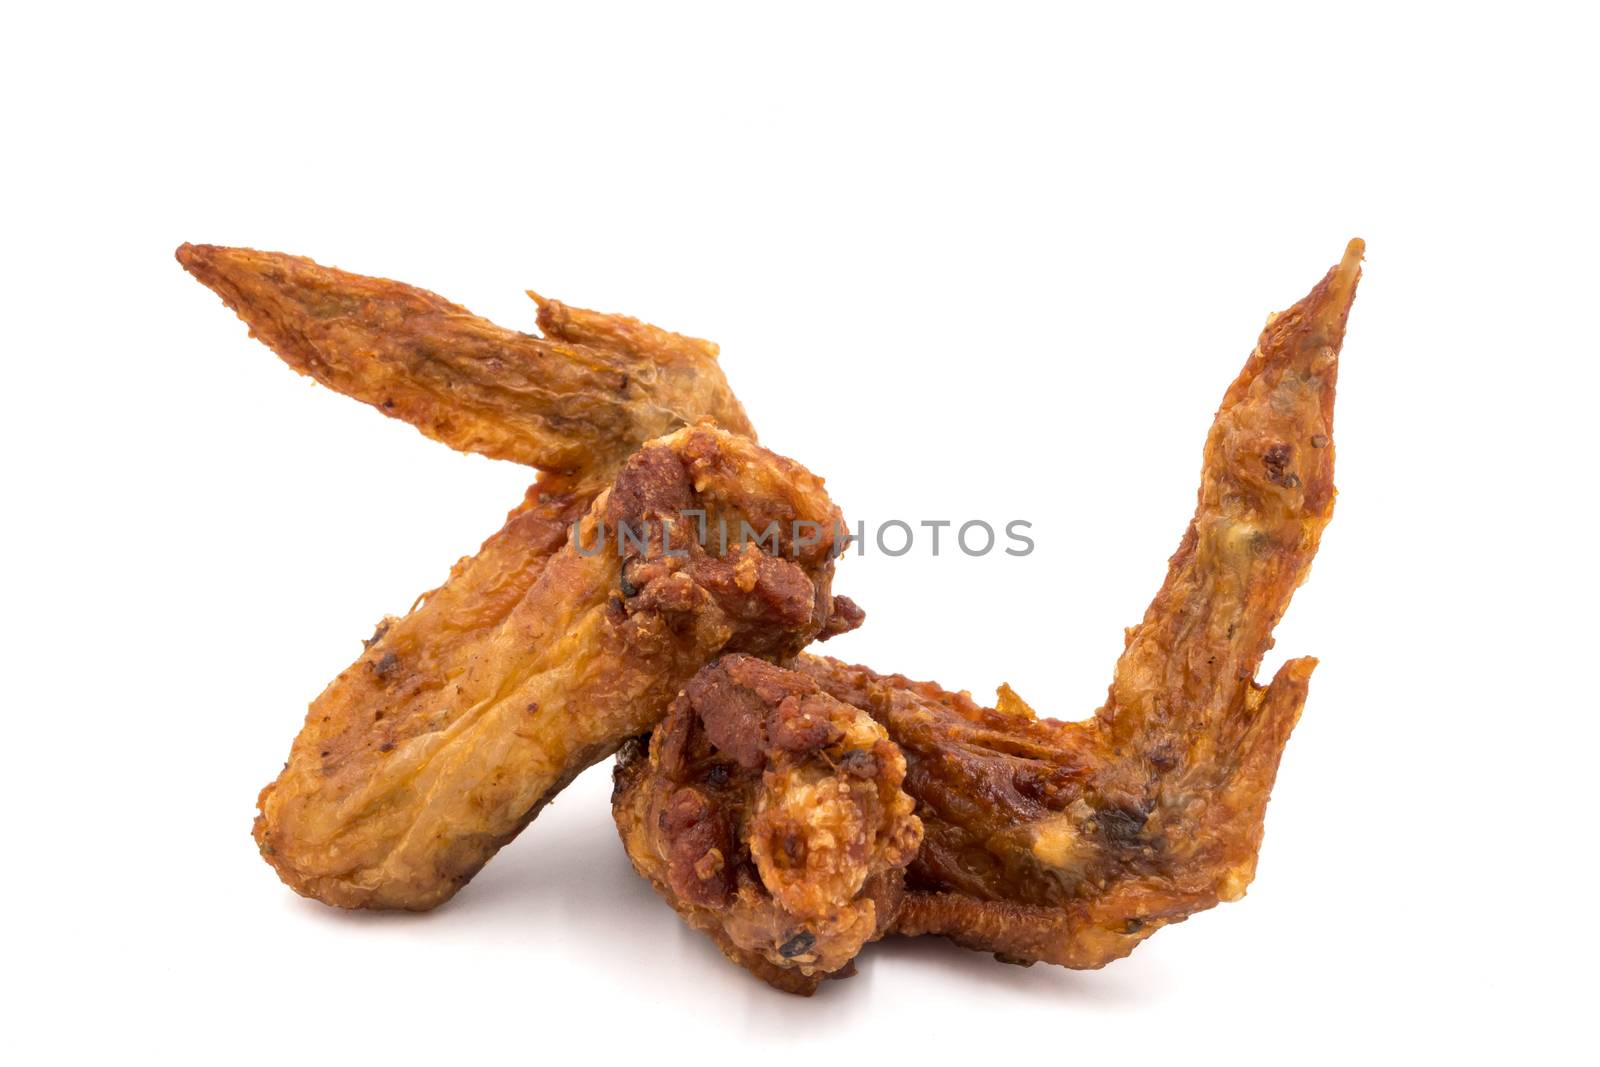 Fried chicken wings on a white background.